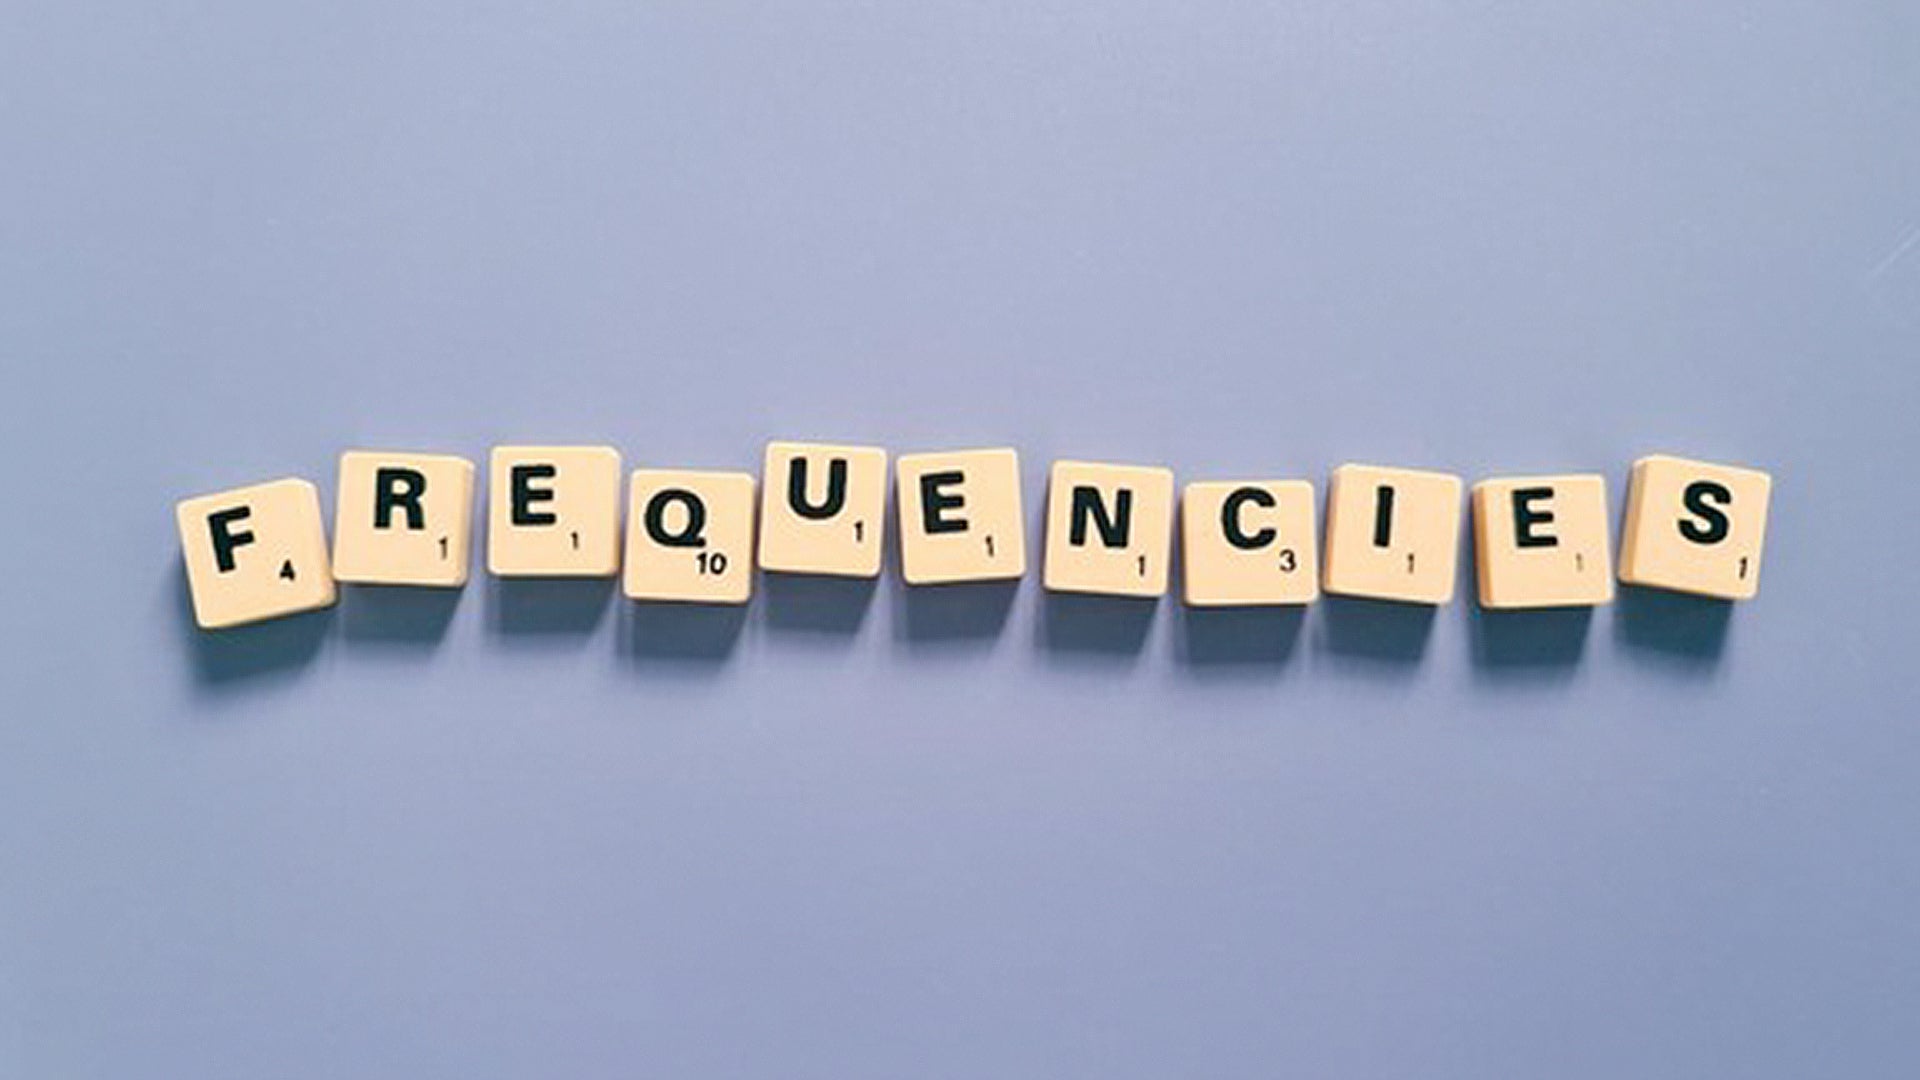 frequencies wrote with scrabble letters